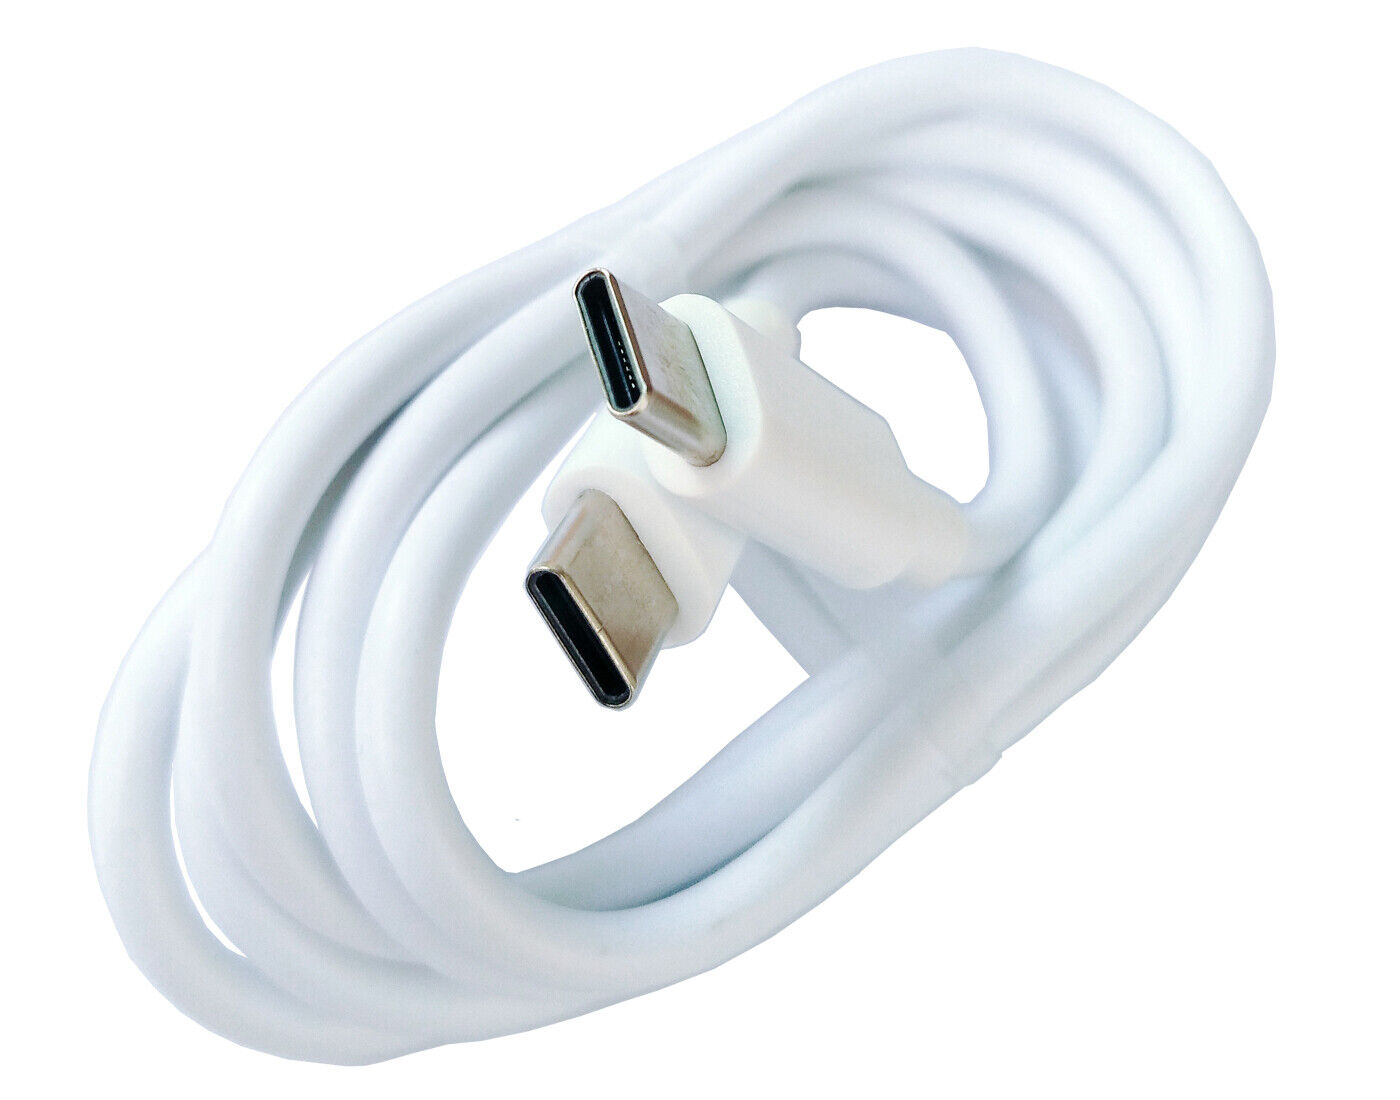 Type C Cable USBC Cord For Kensington Thunderbolt 3 and USB-C Docking Station